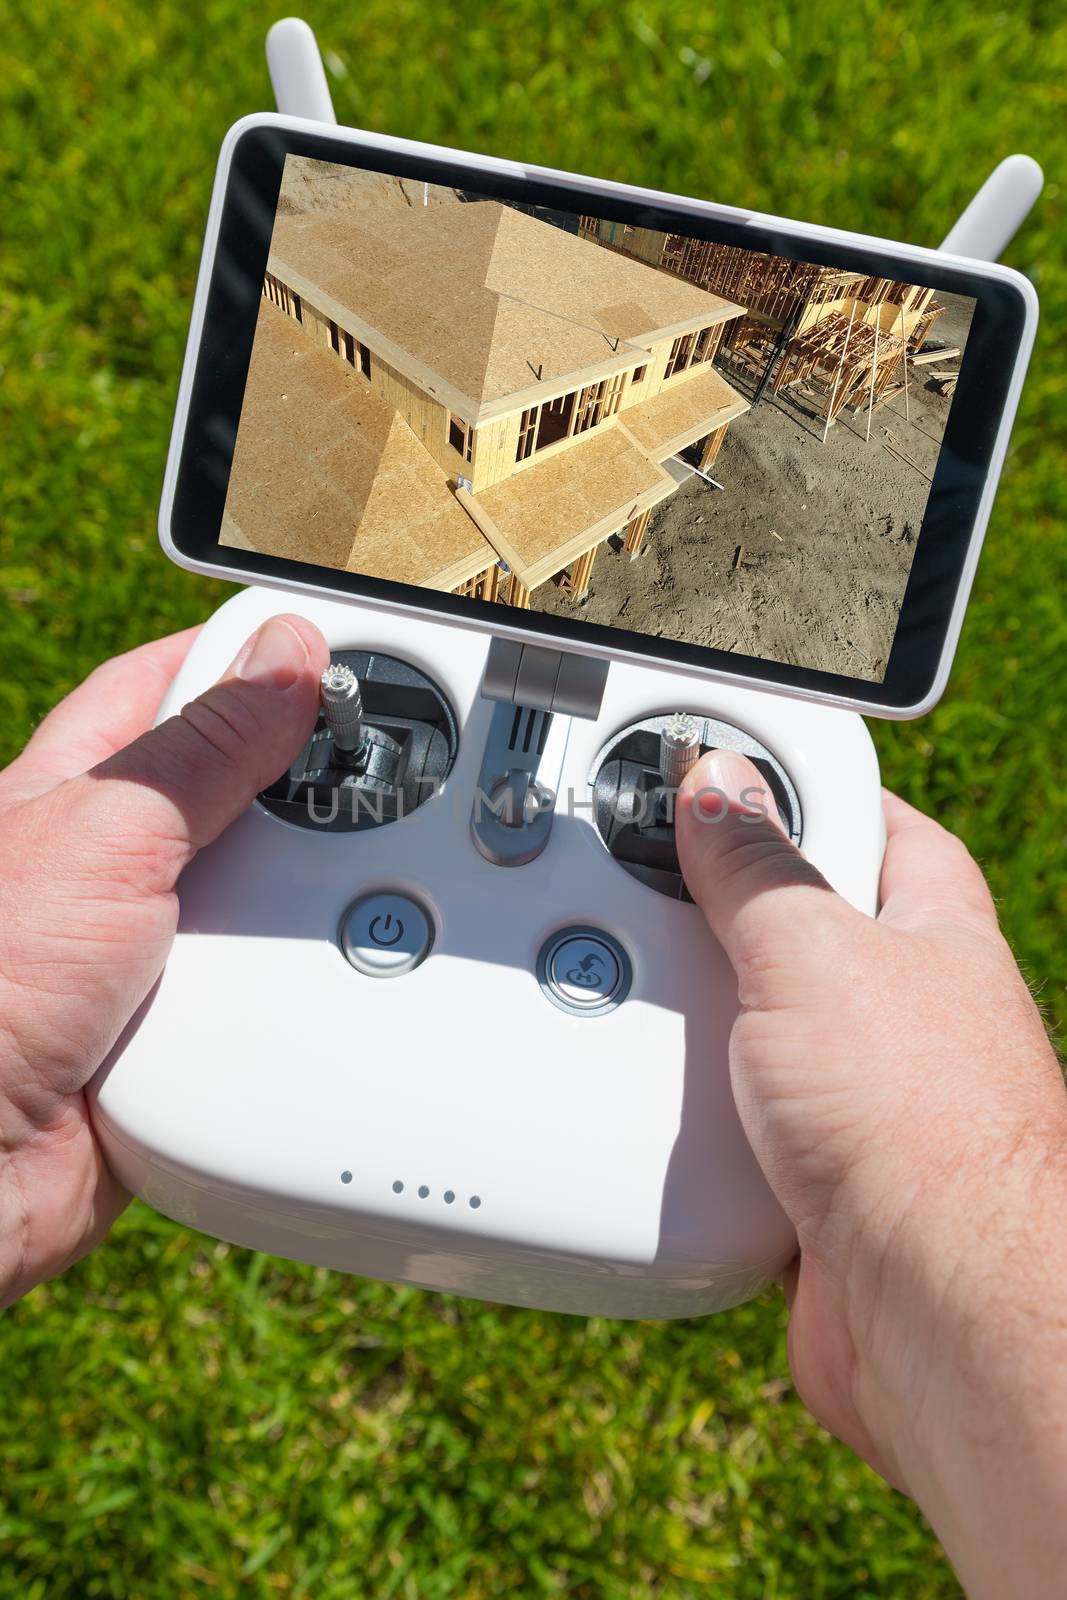 Hands Holding Drone Quadcopter Controller With Construction House Framing on Screen. by Feverpitched